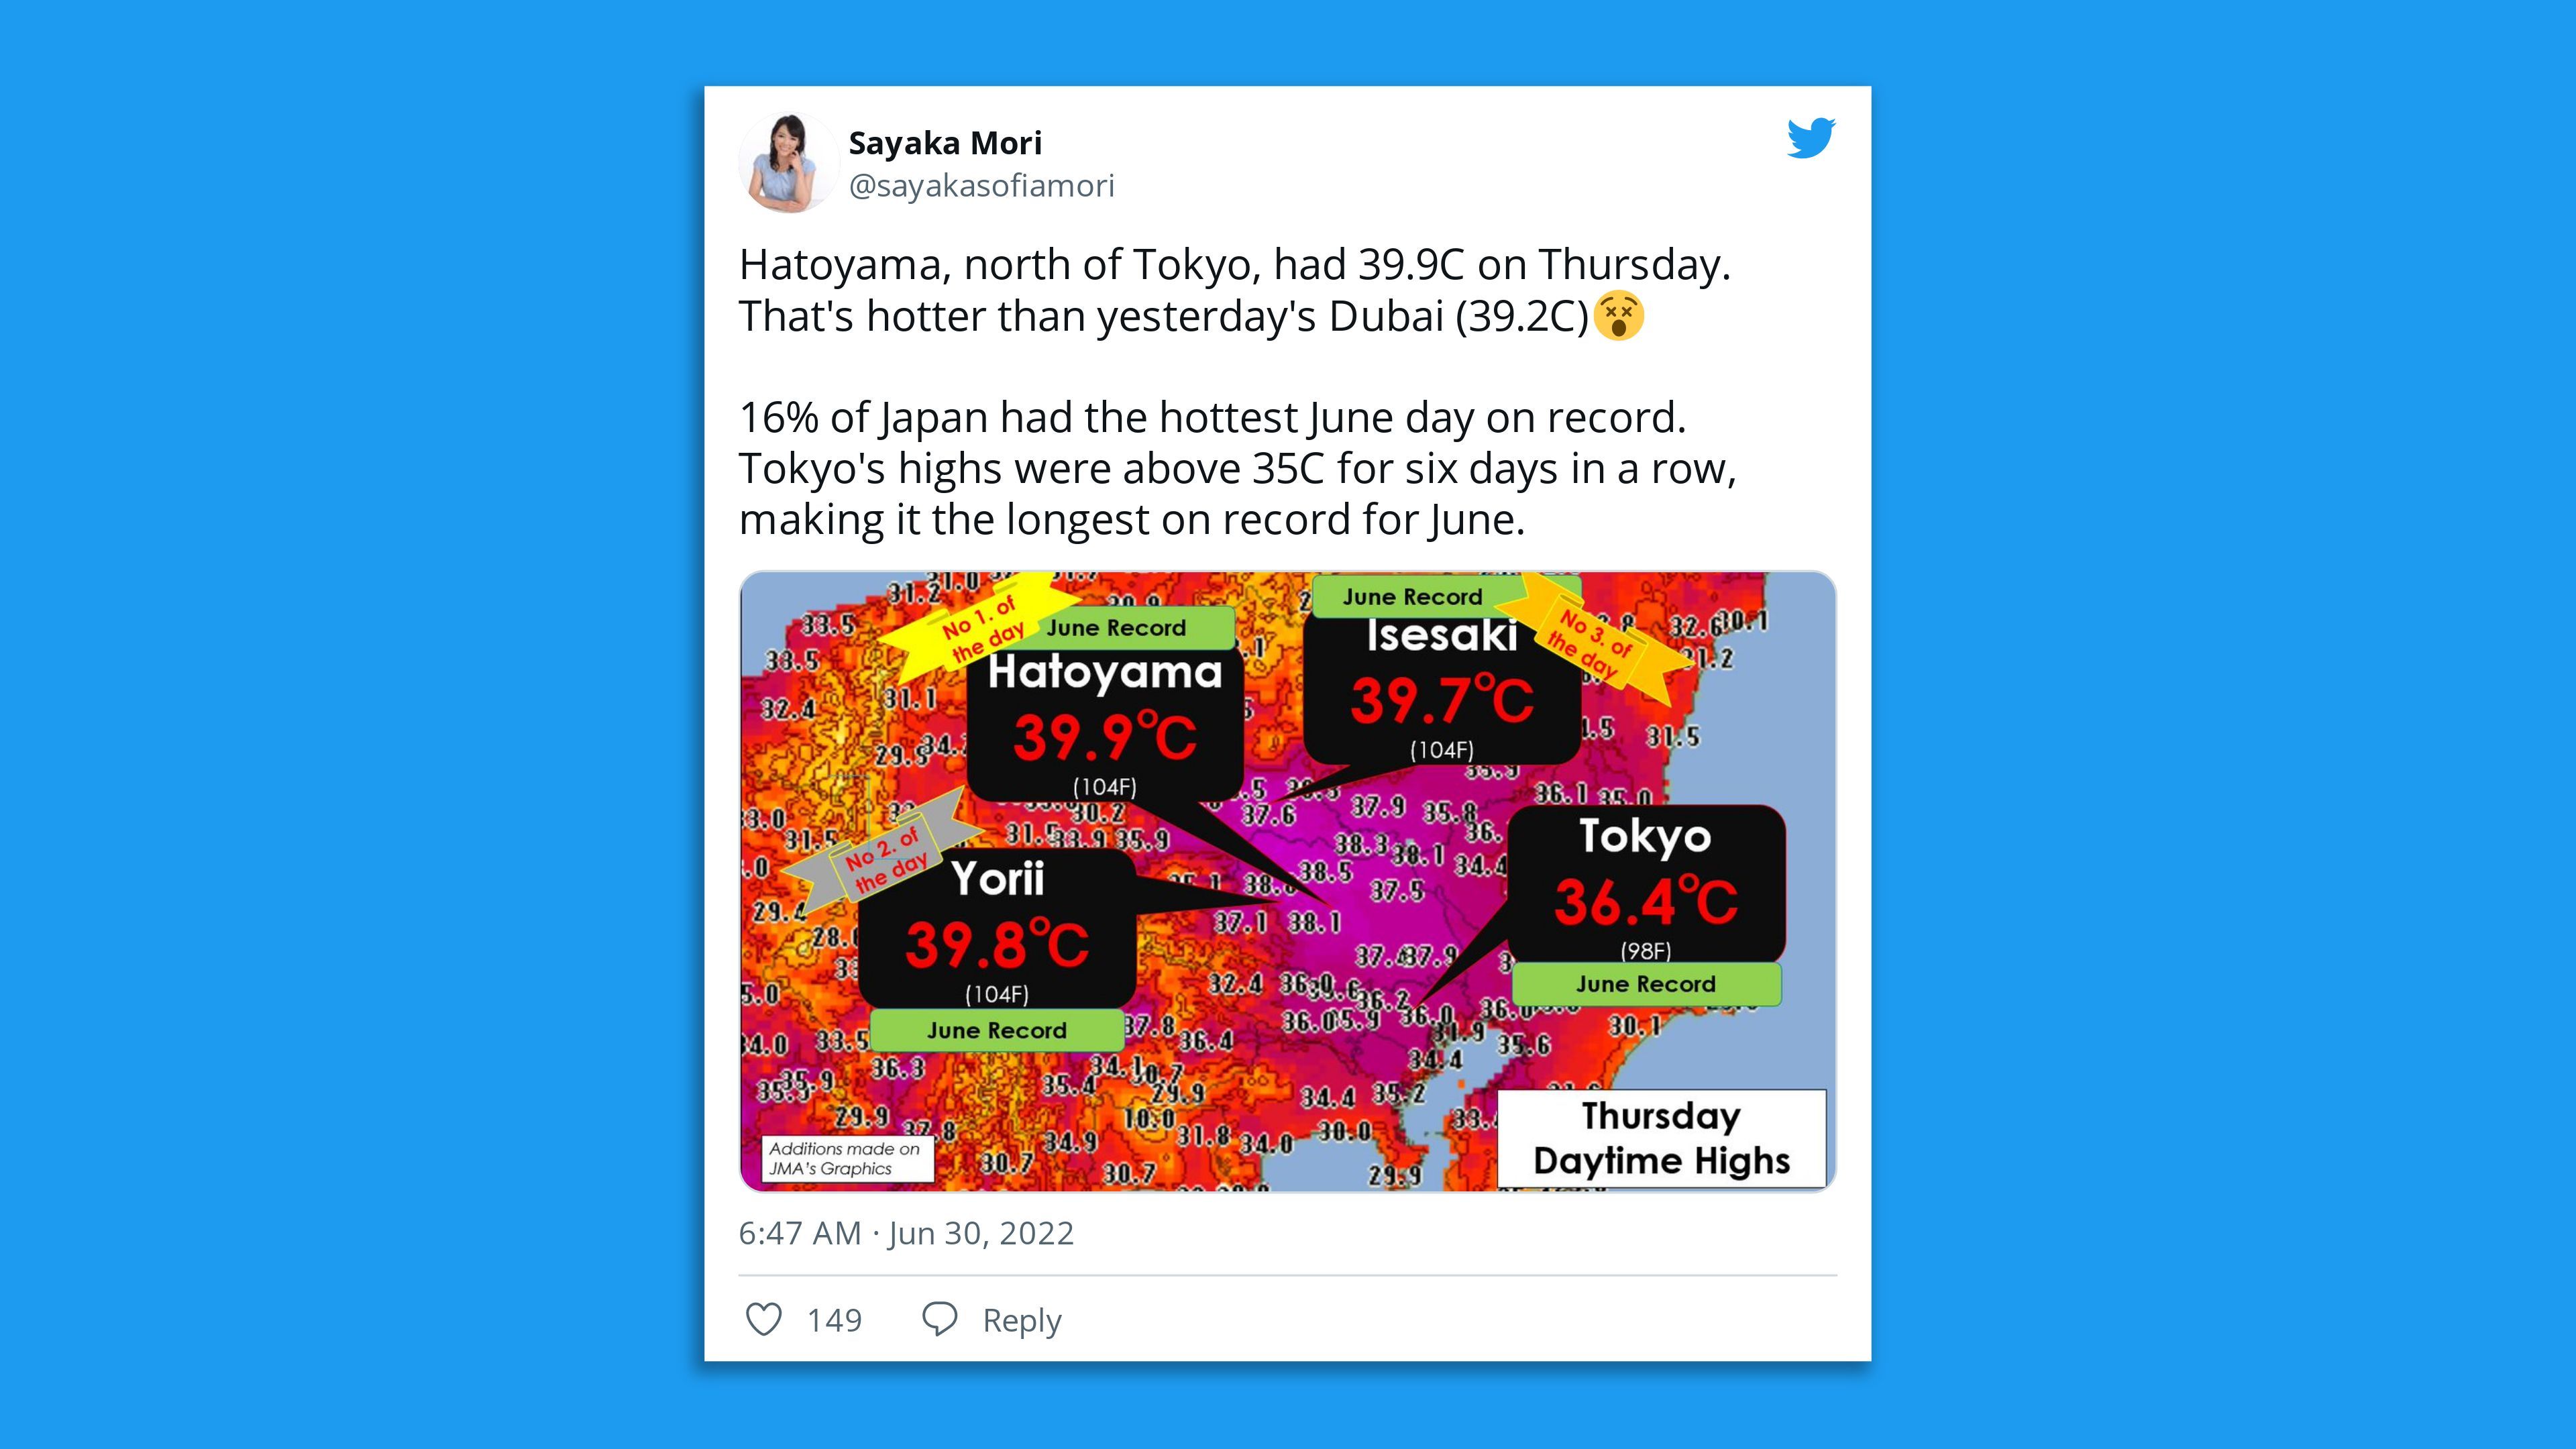 Tweet showing the record heat in Japan on Thursday.